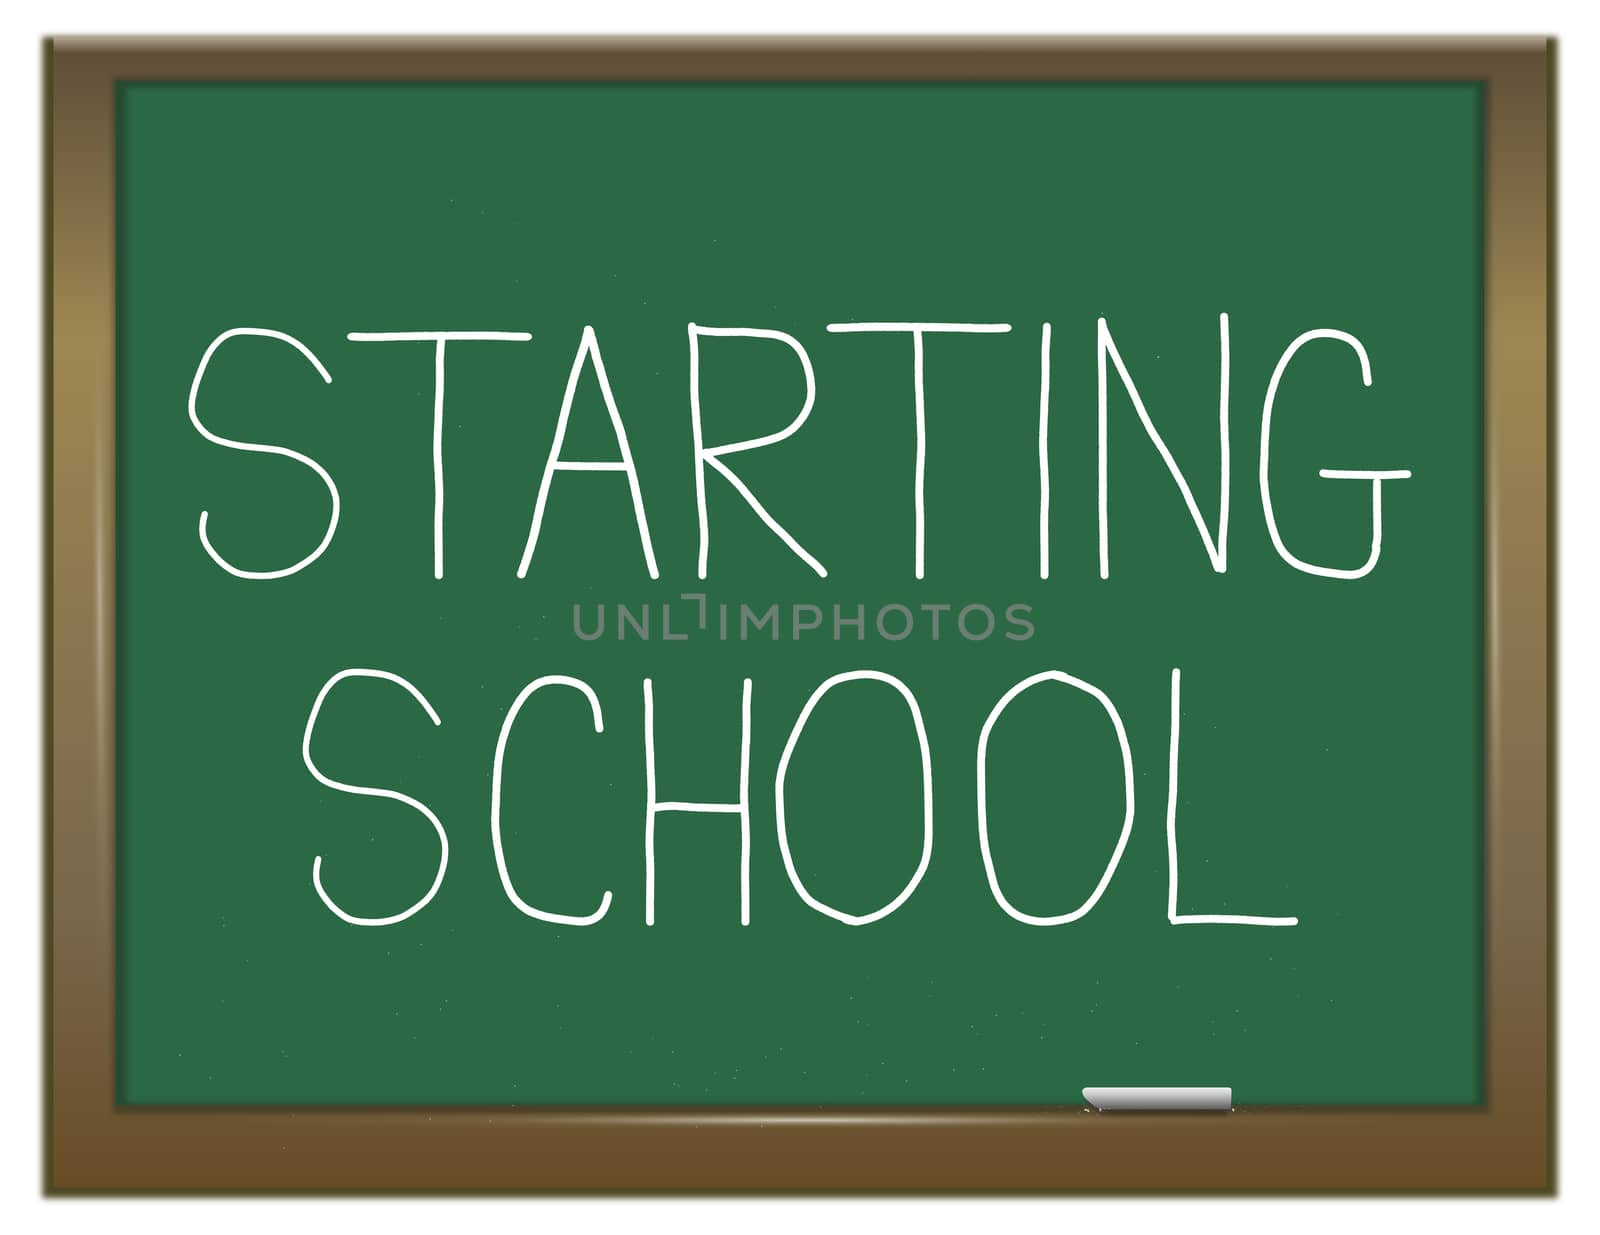 Illustration depicting a green chalkboard with a starting school concept.